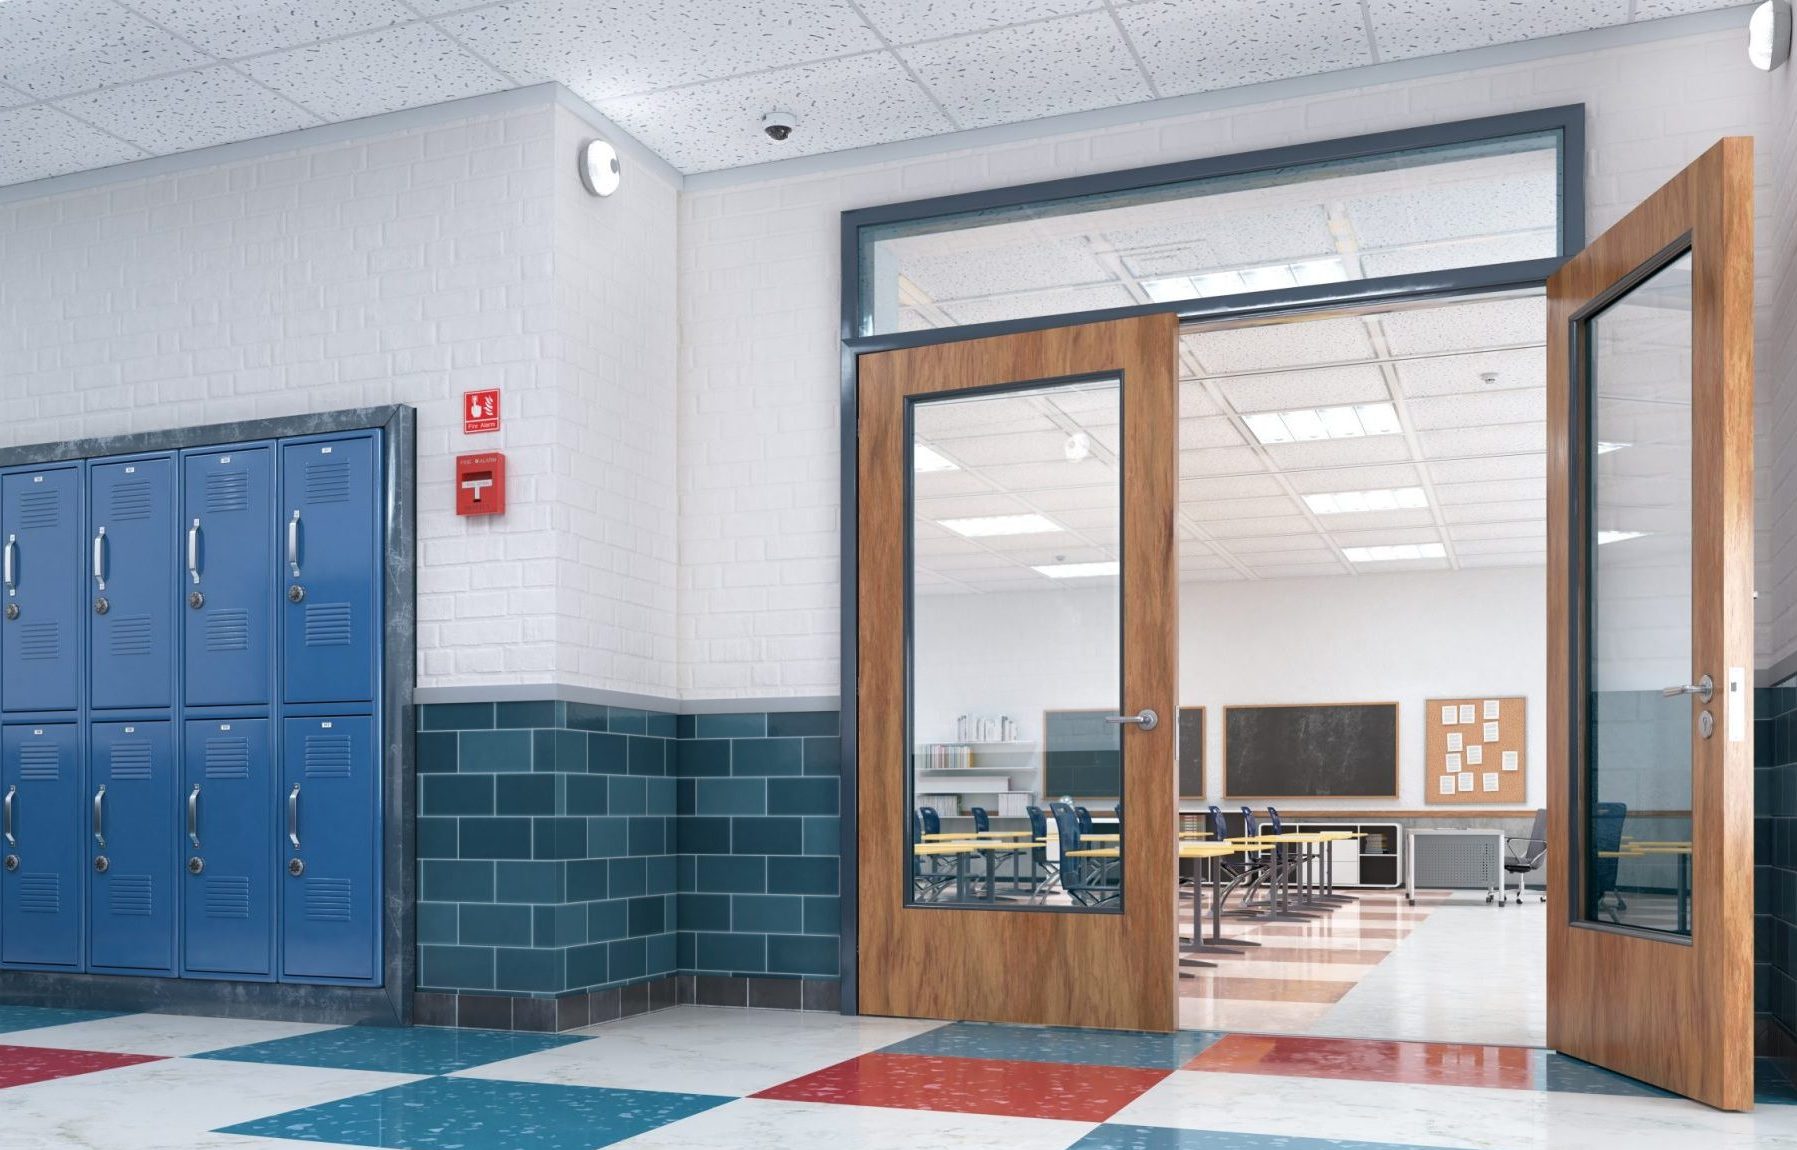 School Hallway with blue lockers and Entrance to Classroom, with Wooden Doors with large windows and desks past the door